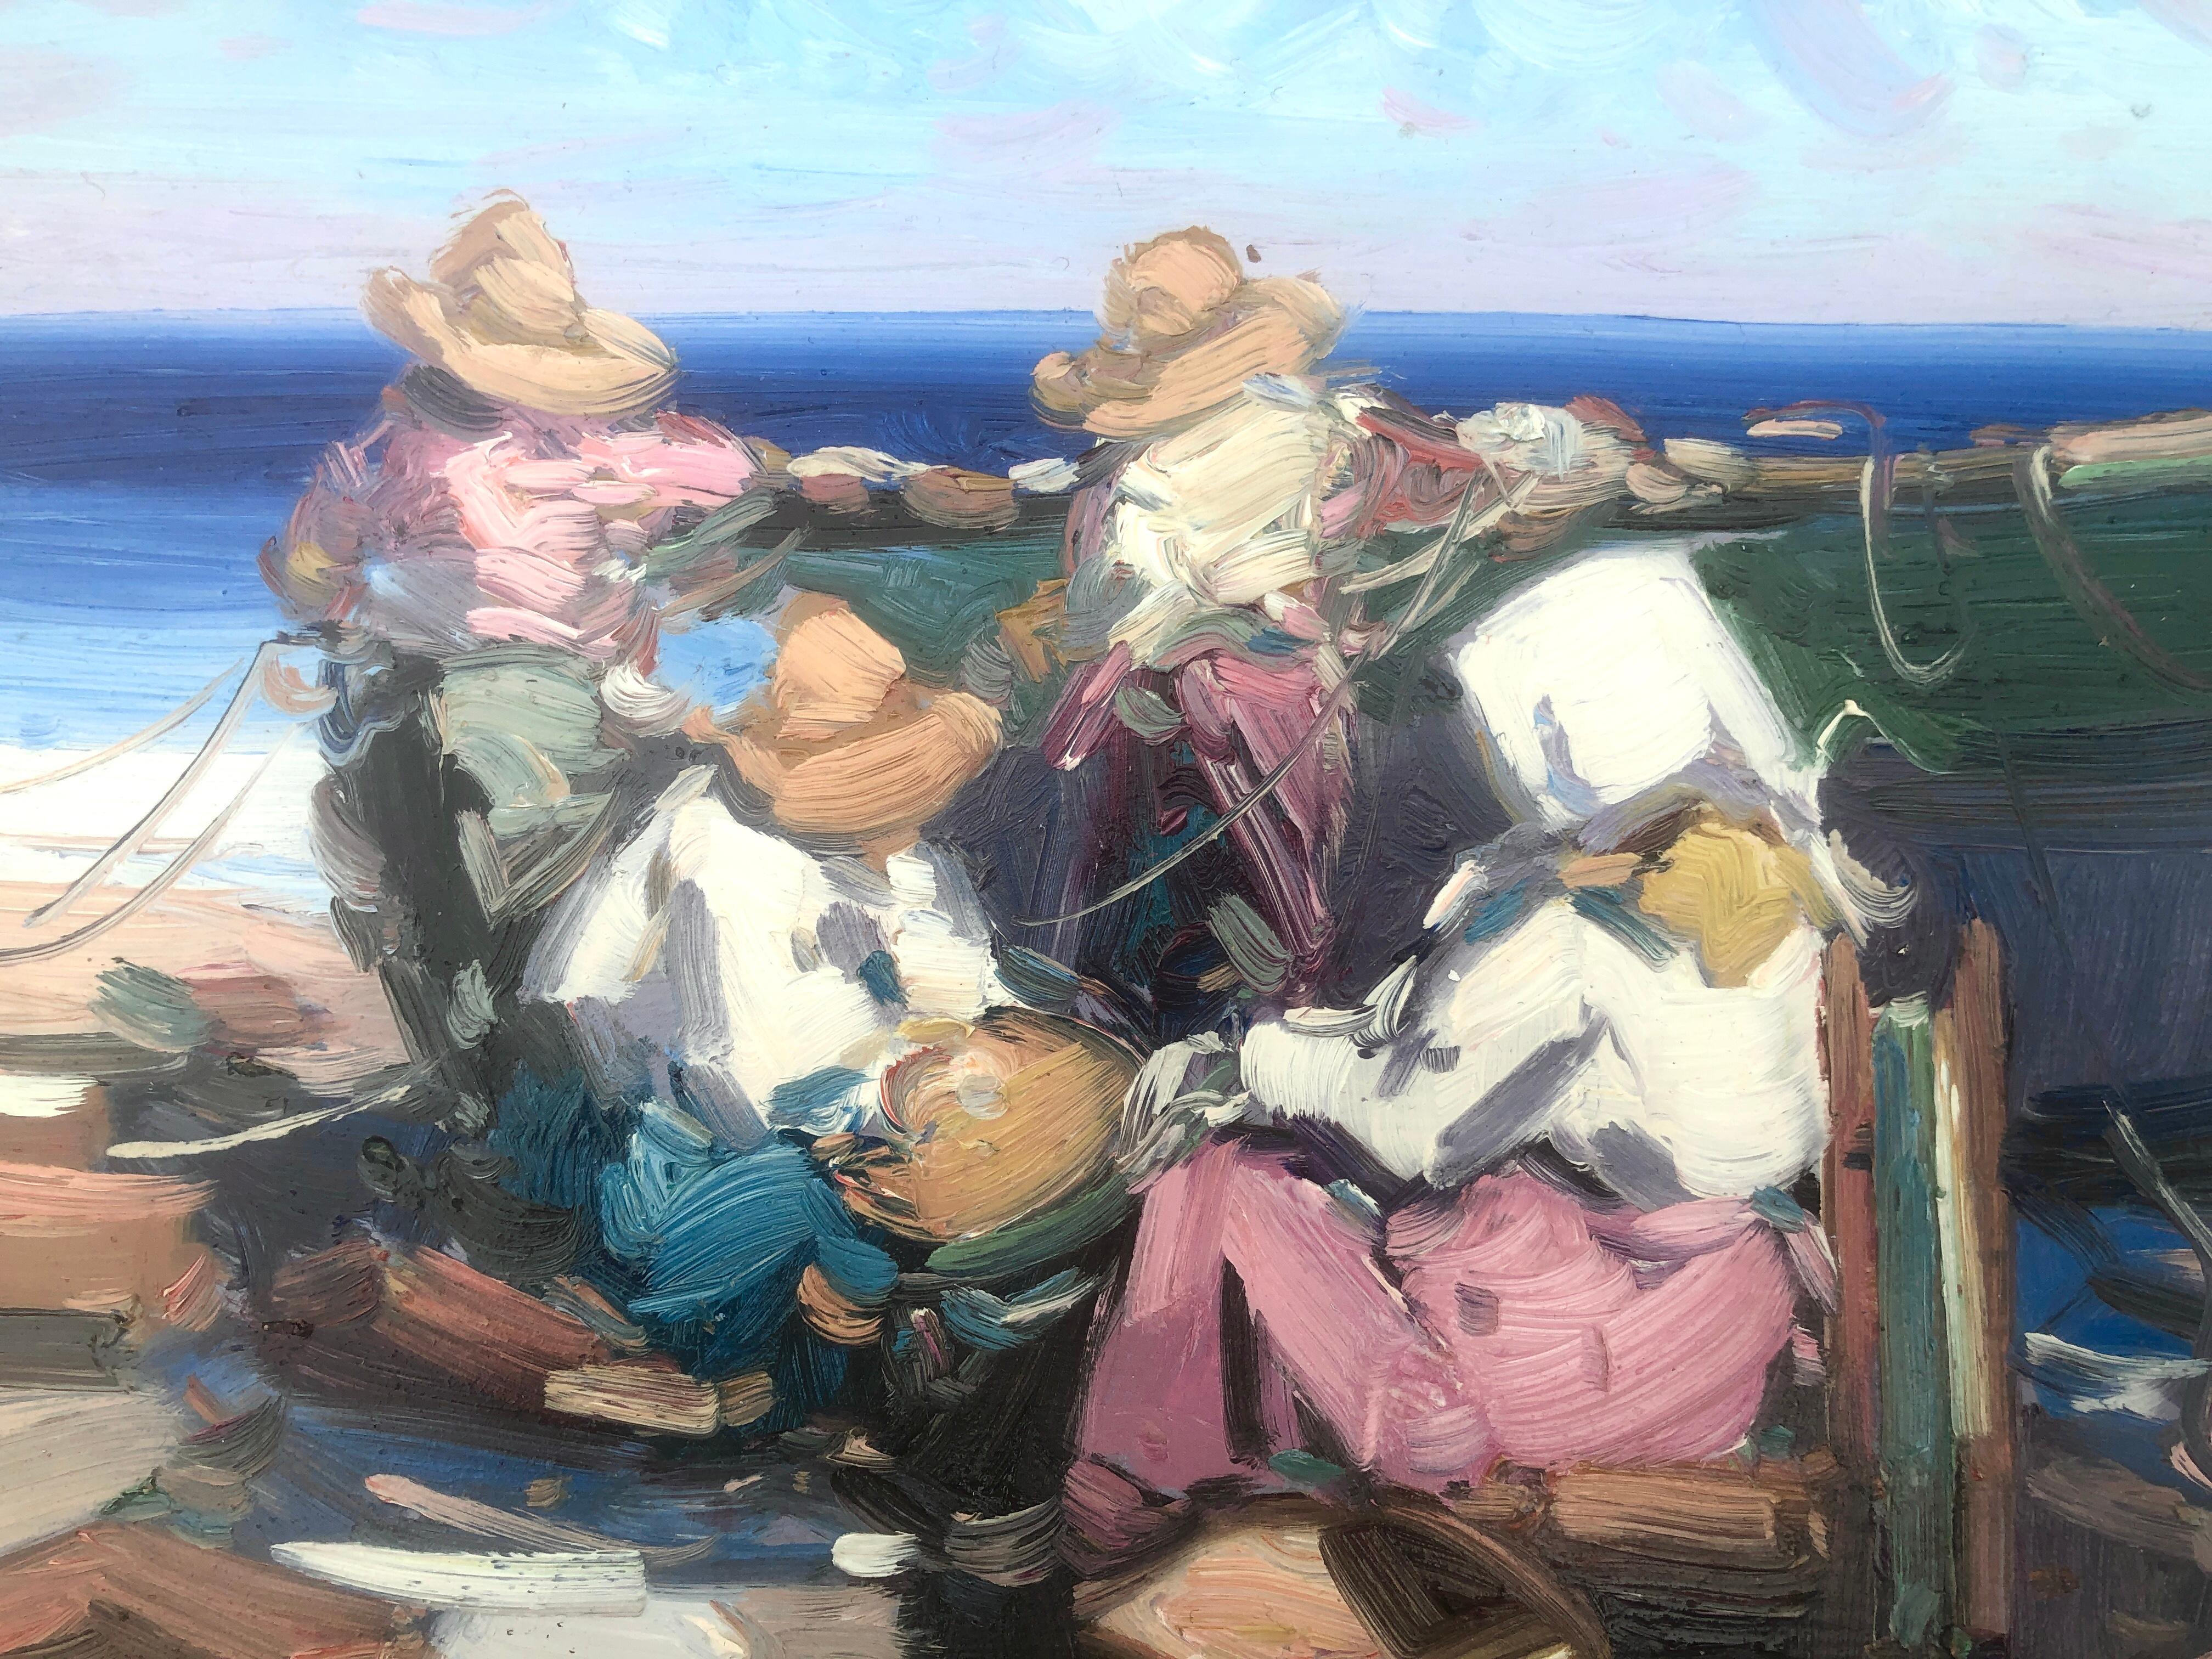 Gabriel Casarrubios Martín (1953) - Fishermen - Oil on panel
Oil size 22x27 cm.
Frameless.

Gabriel Casarrubios Martín (1953)

The Toledo artist trained in Fine Arts in Madrid, at the San Fernando Faculty and at the UCM. In the work of Gabriel